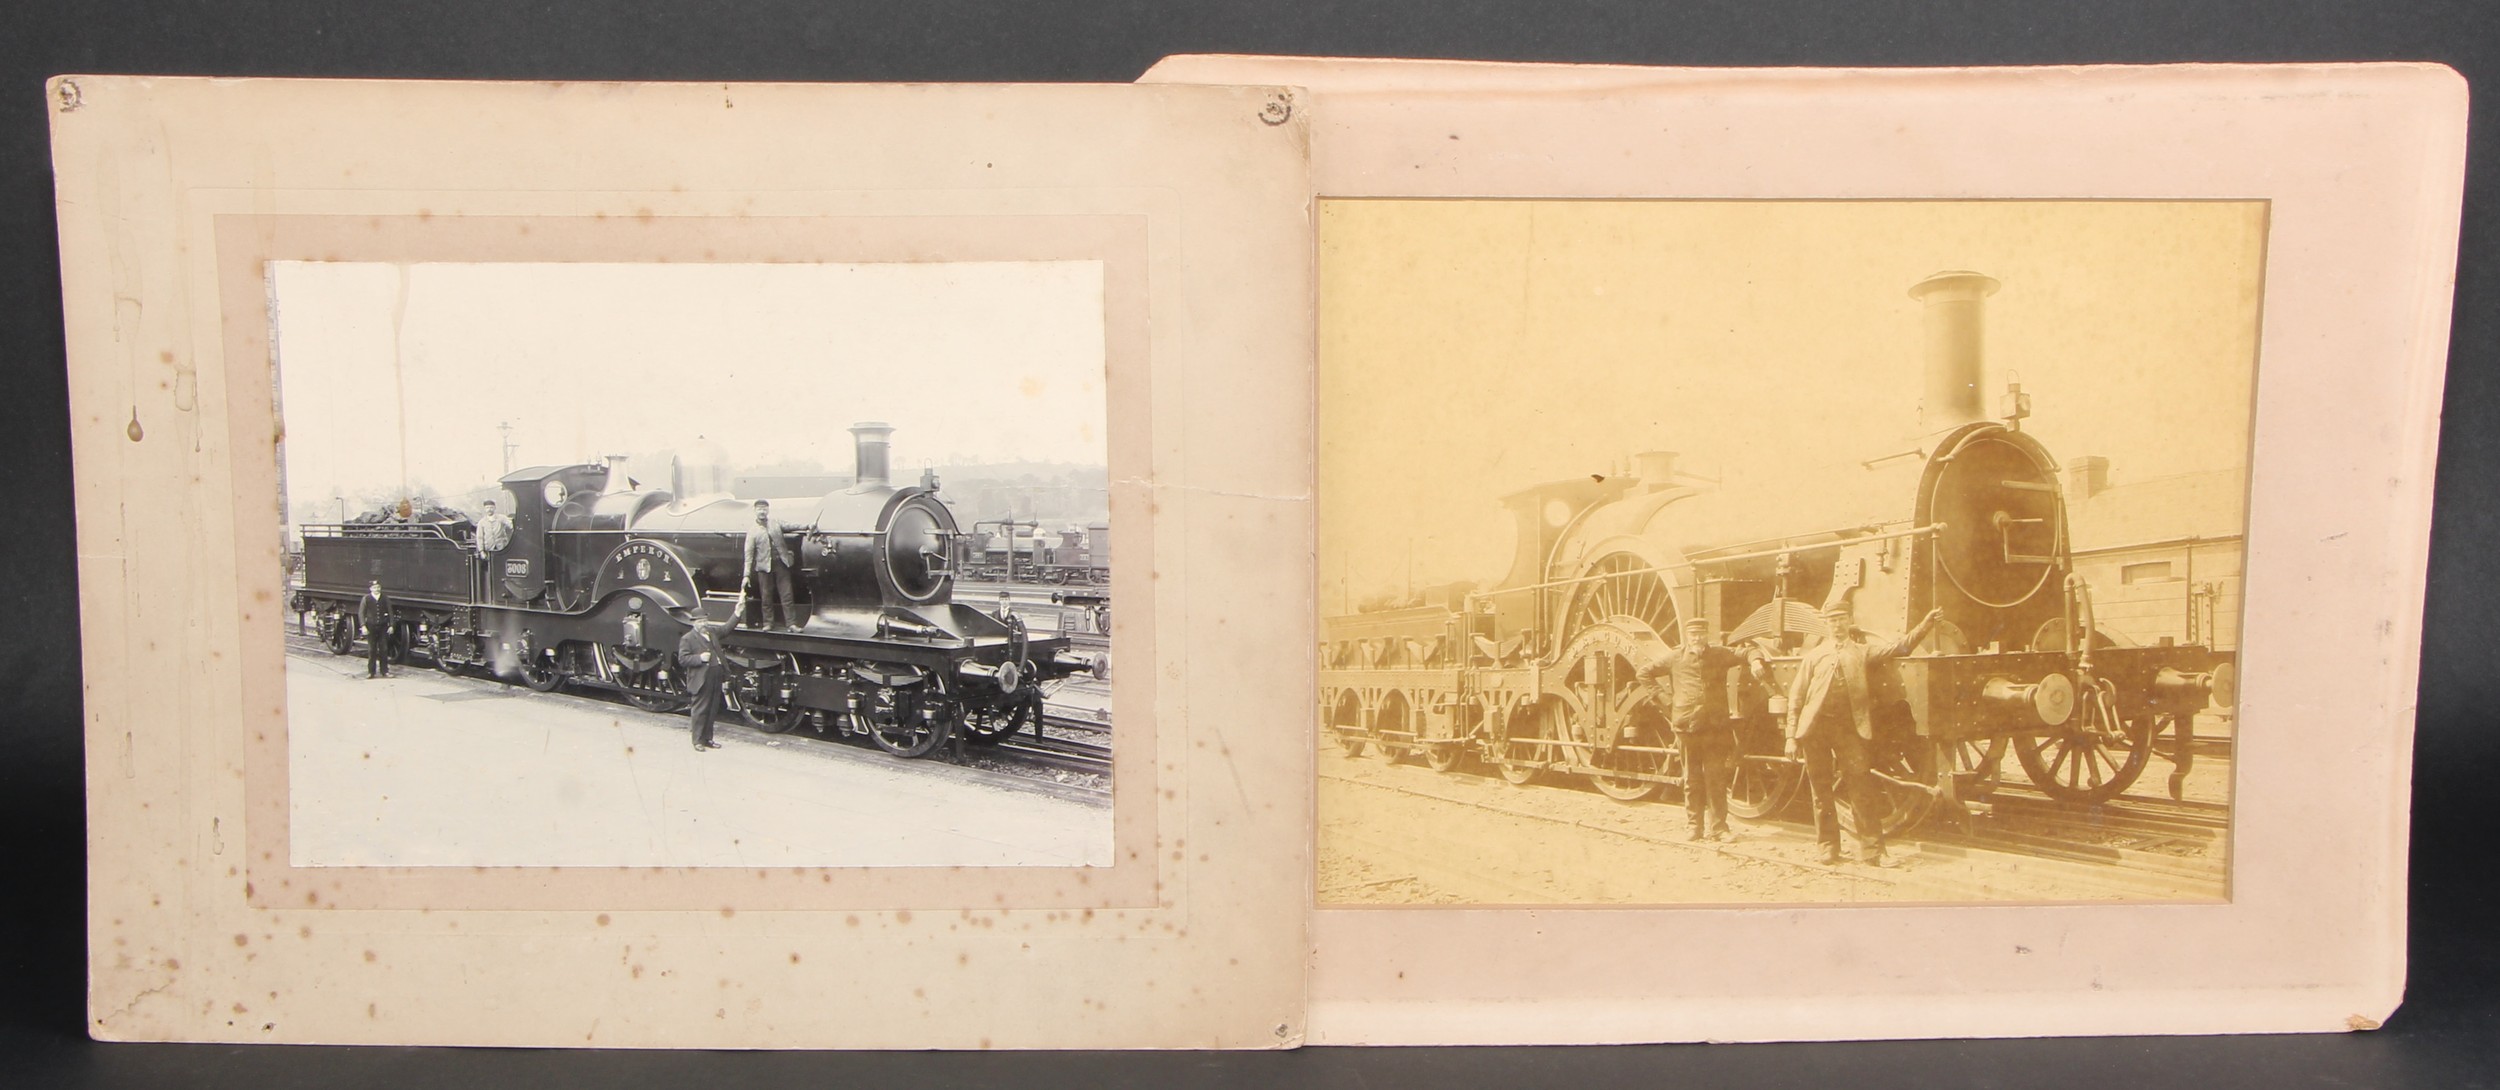 Photography - Railwayana - a collection of 19th century photographs of railway locomotives, many - Image 3 of 8